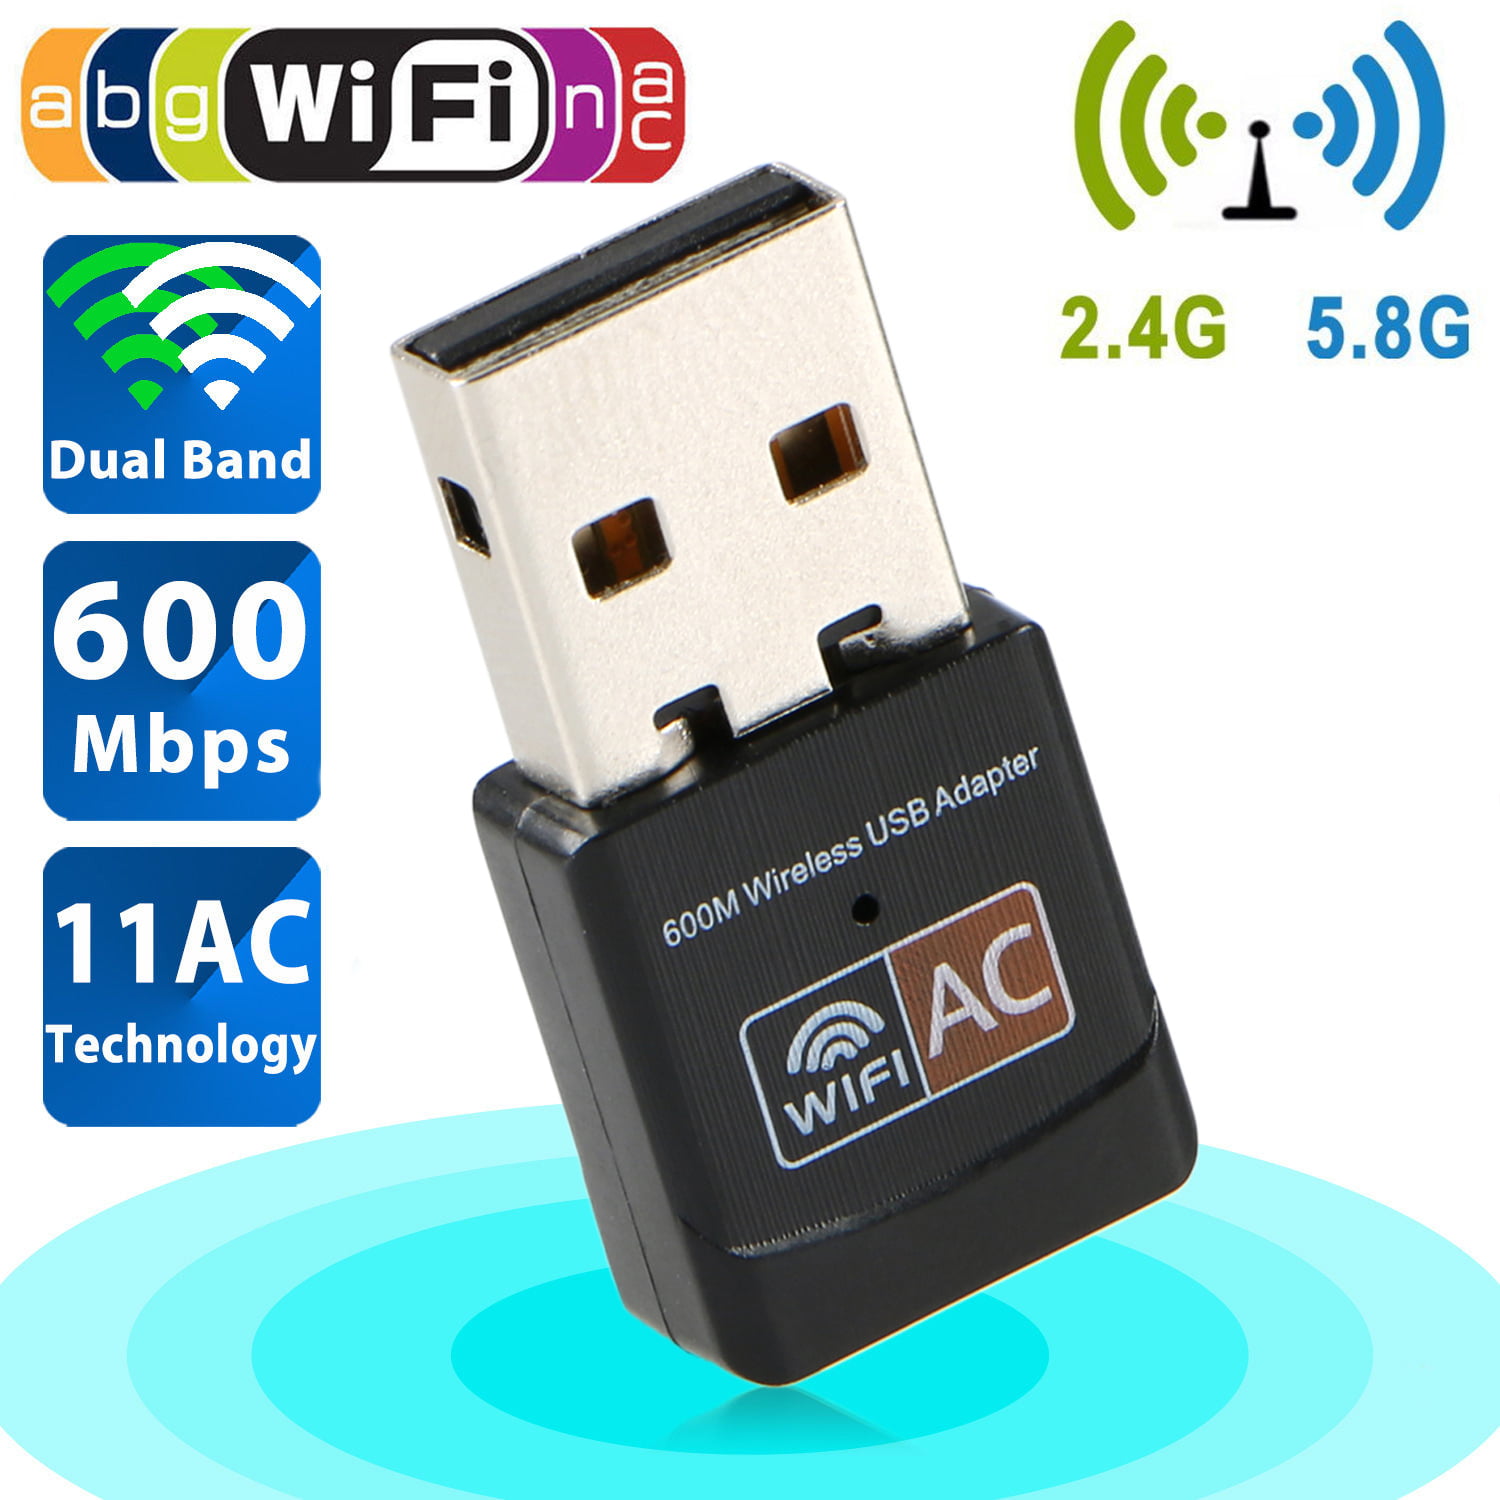 USB WiFi Dual Band Card Wireless 802.11a//b//g//n Adapter 2.4G 5GHz 600Mbps